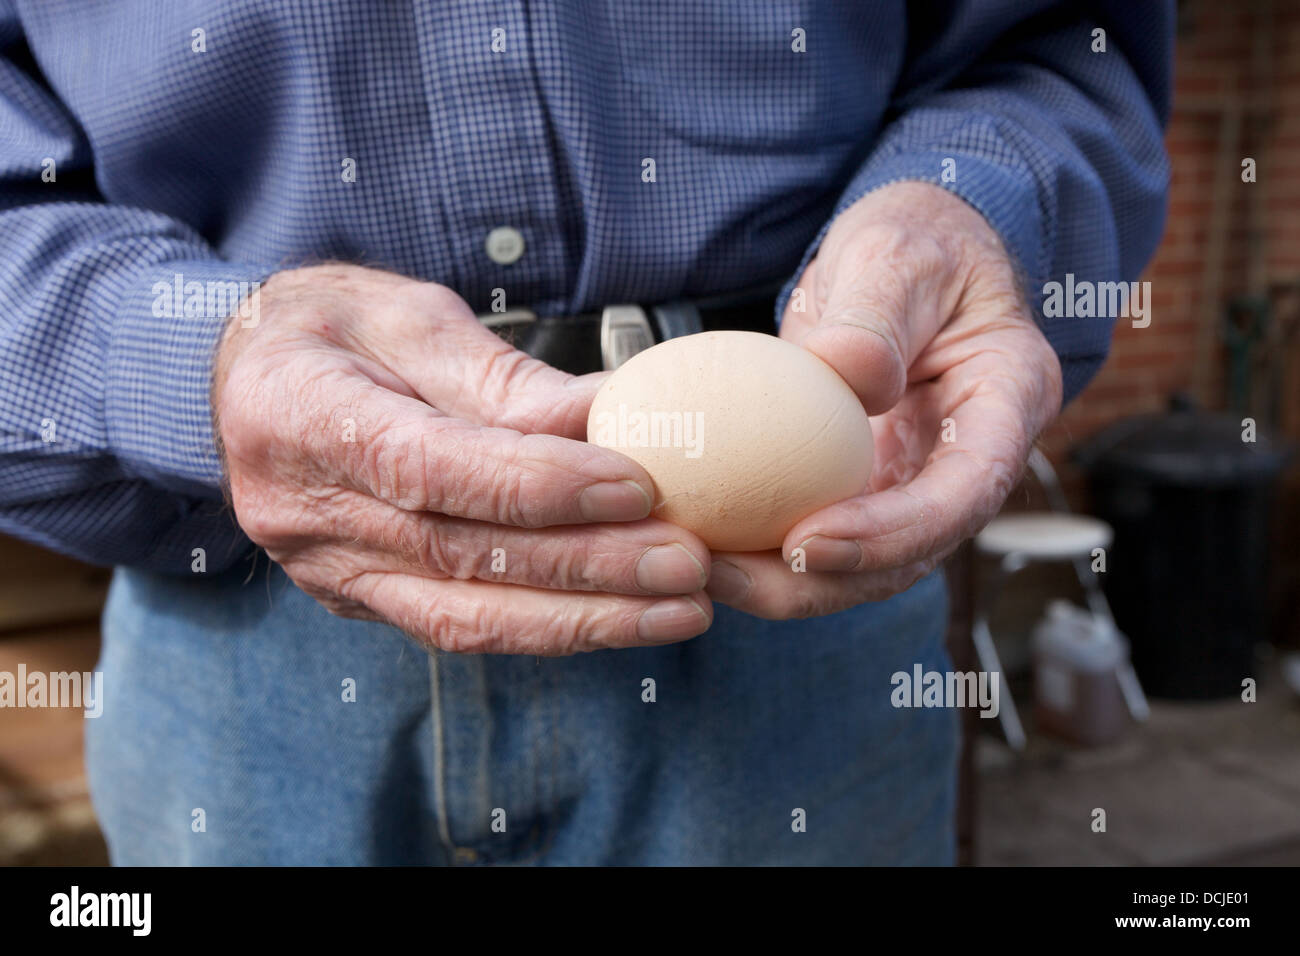 A man holding a feshly laid egg Stock Photo